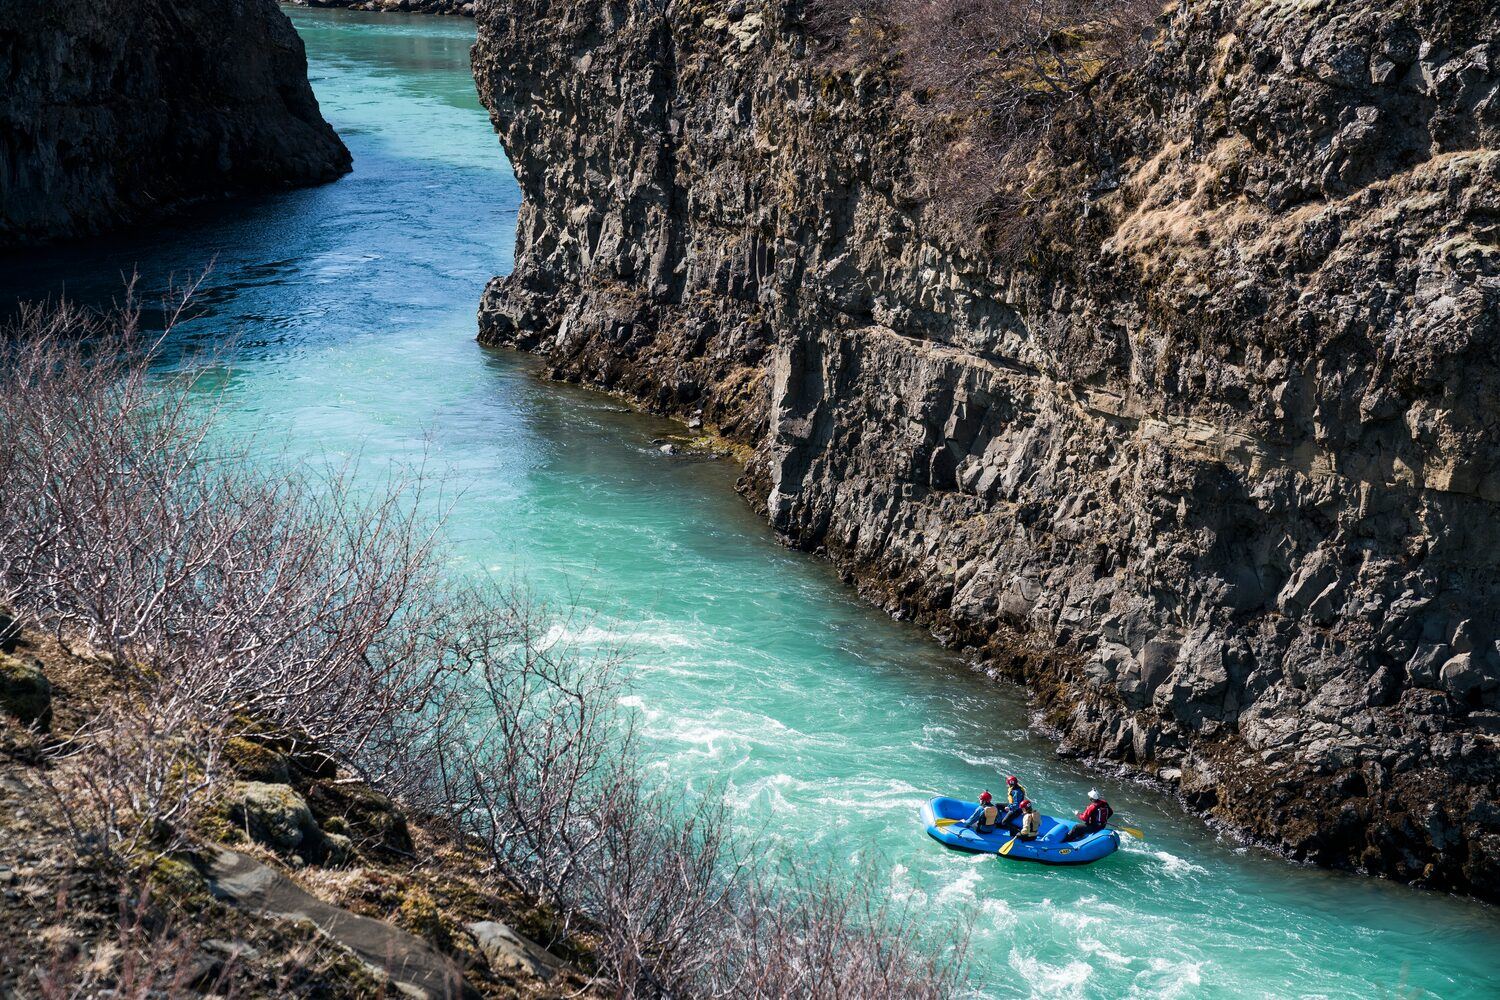 Four people in a blue raft, flowing down the Gullfoss Canyon, in Hvítá river, southwest Iceland